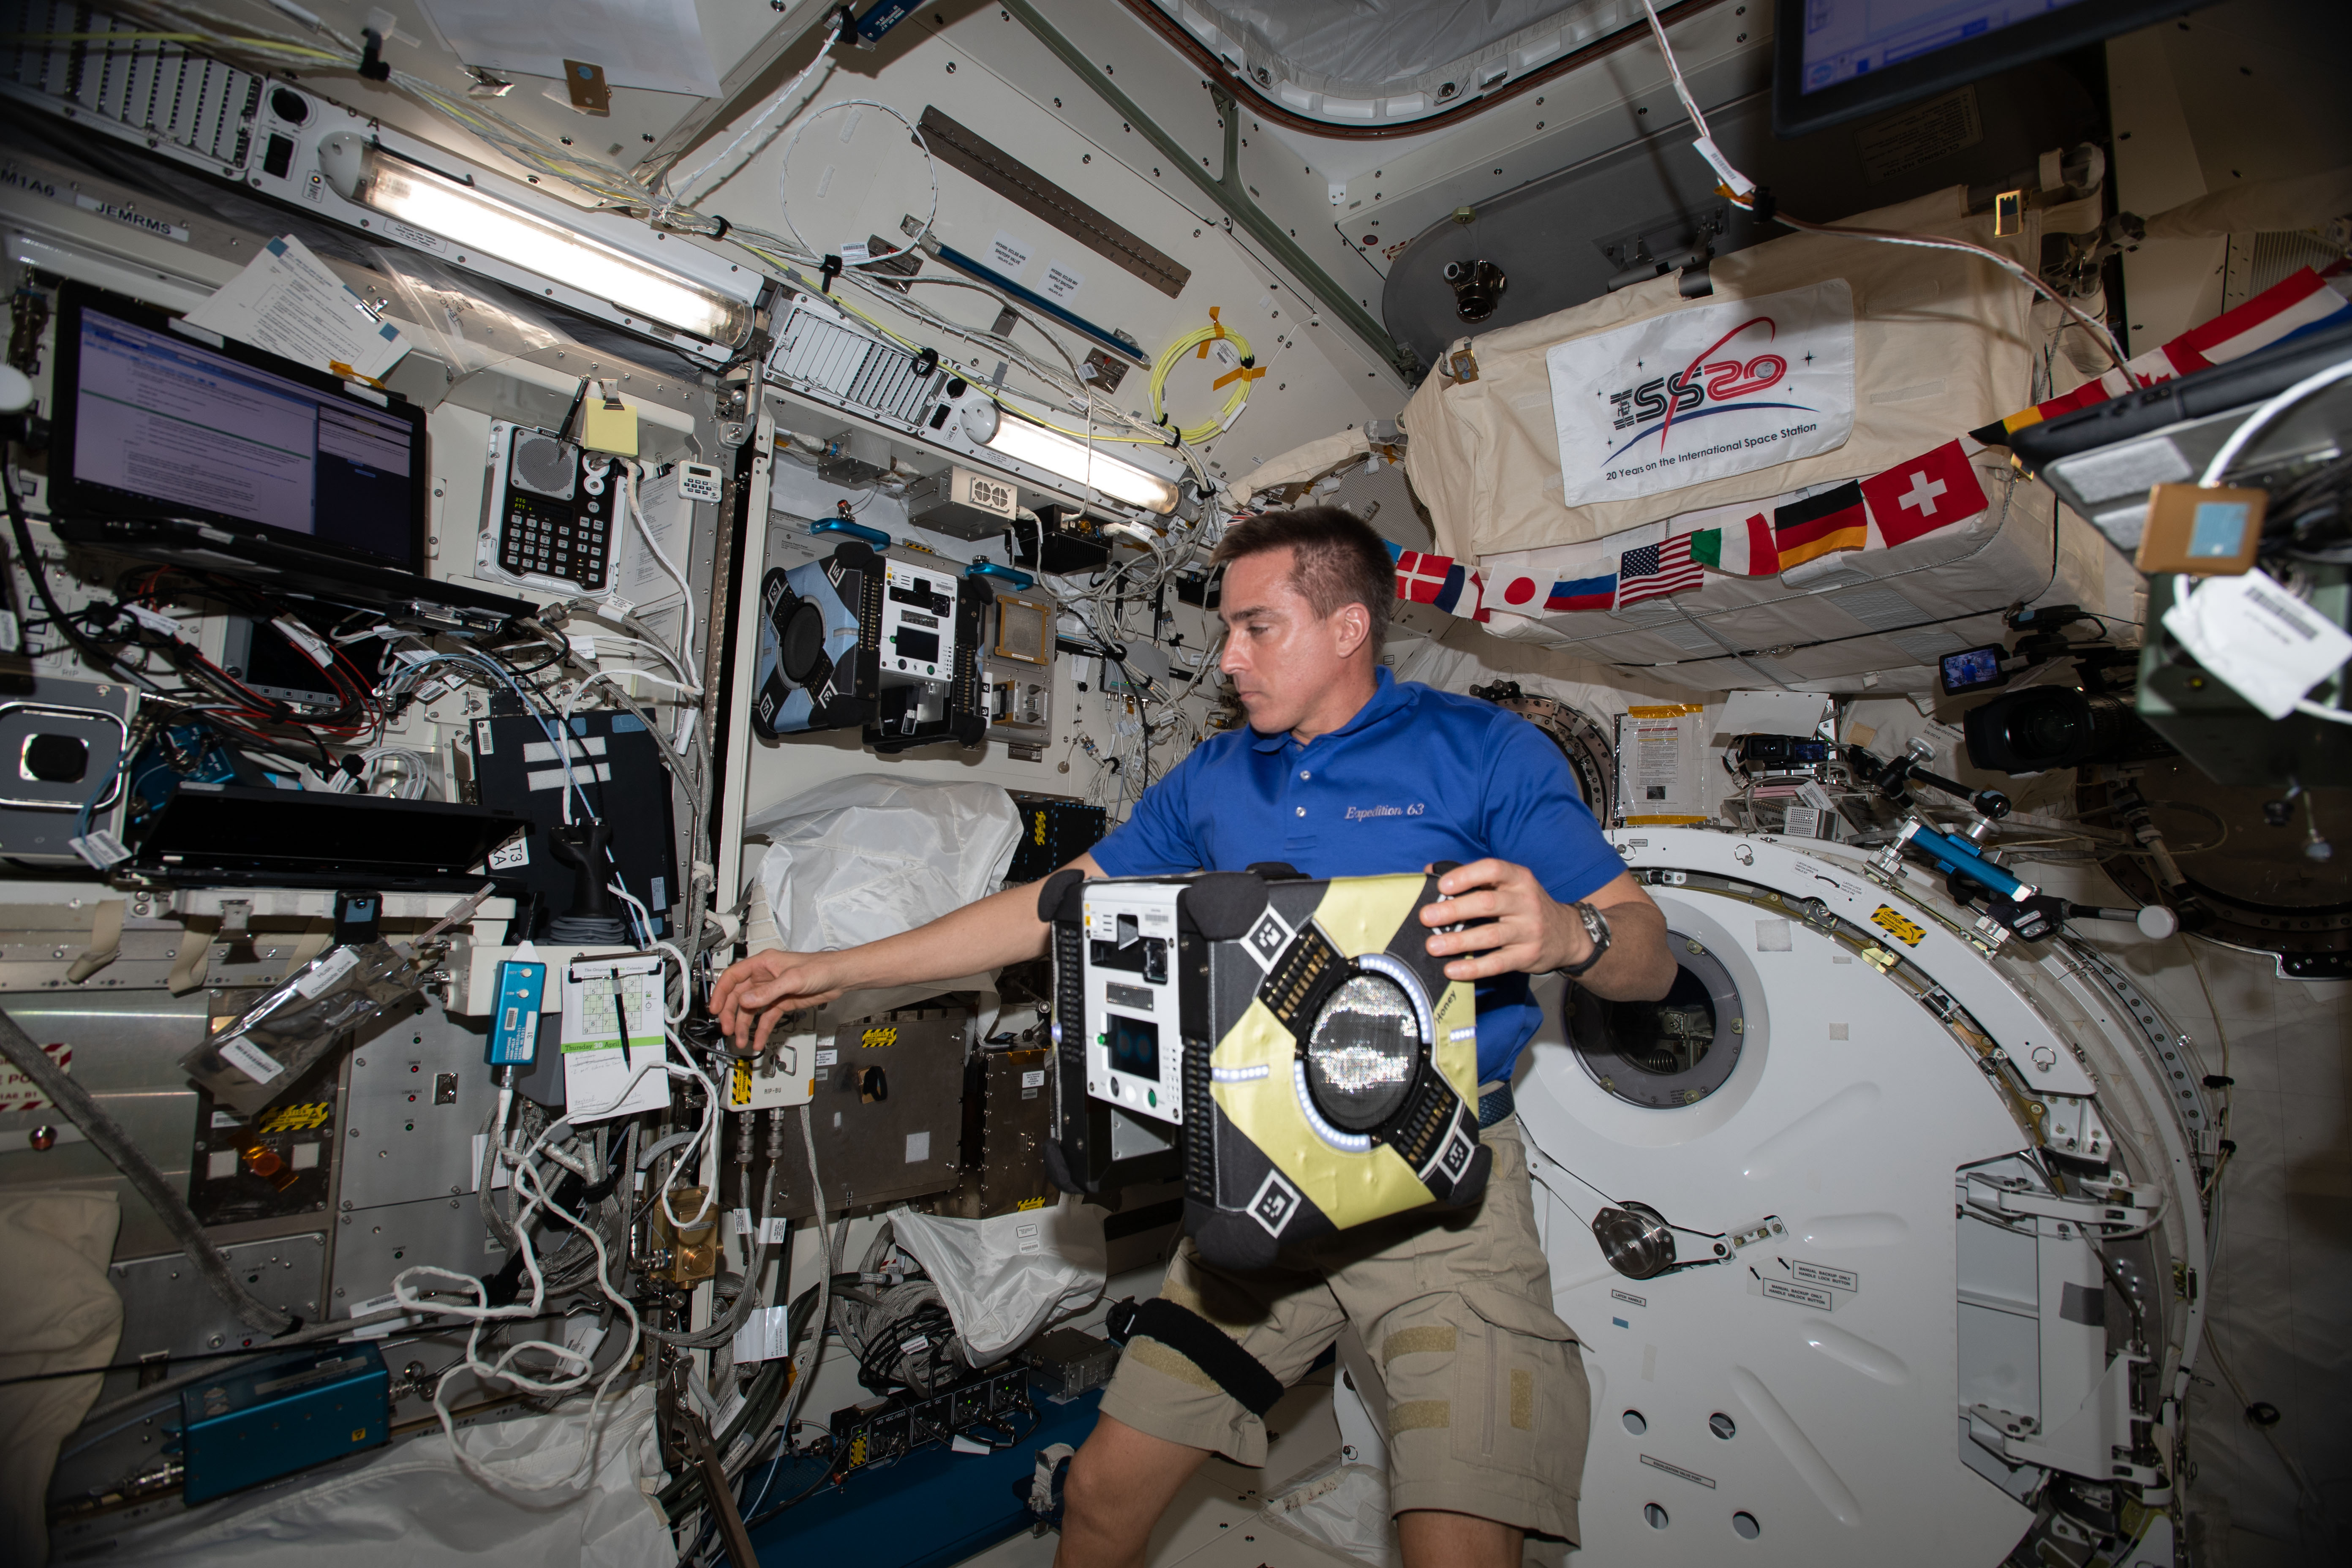 NASA Astronaut Chris Cassidy works with an Astrobee robot, named Honey, inside the Kibo laboratory module.